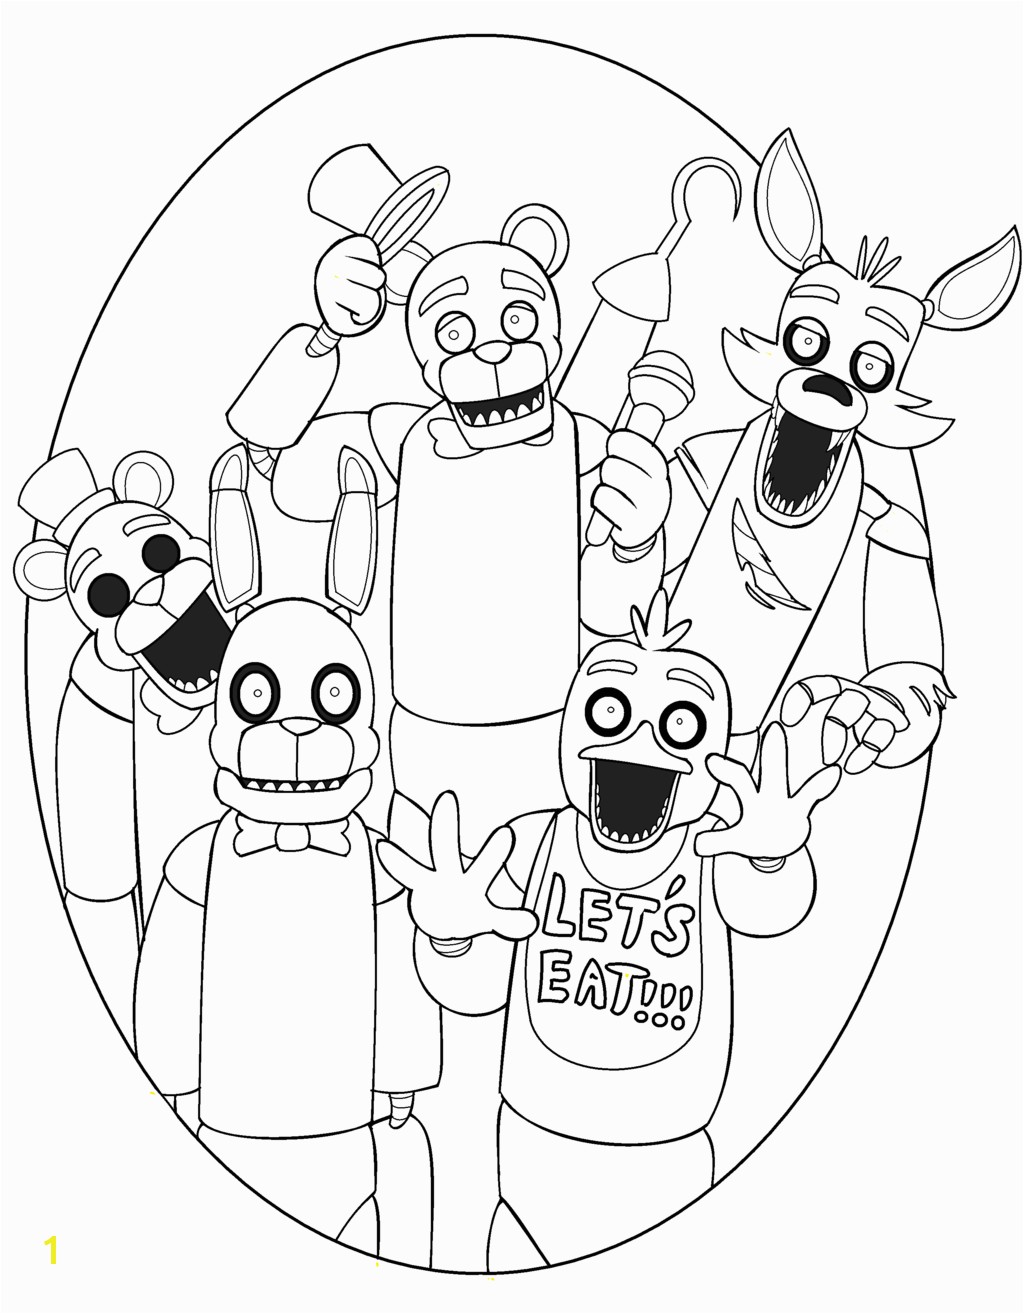 Coloring Pages Five Nights at Freddy S 3 Sensational Freddy Fazbear Coloring Page Free Printable Five Nights